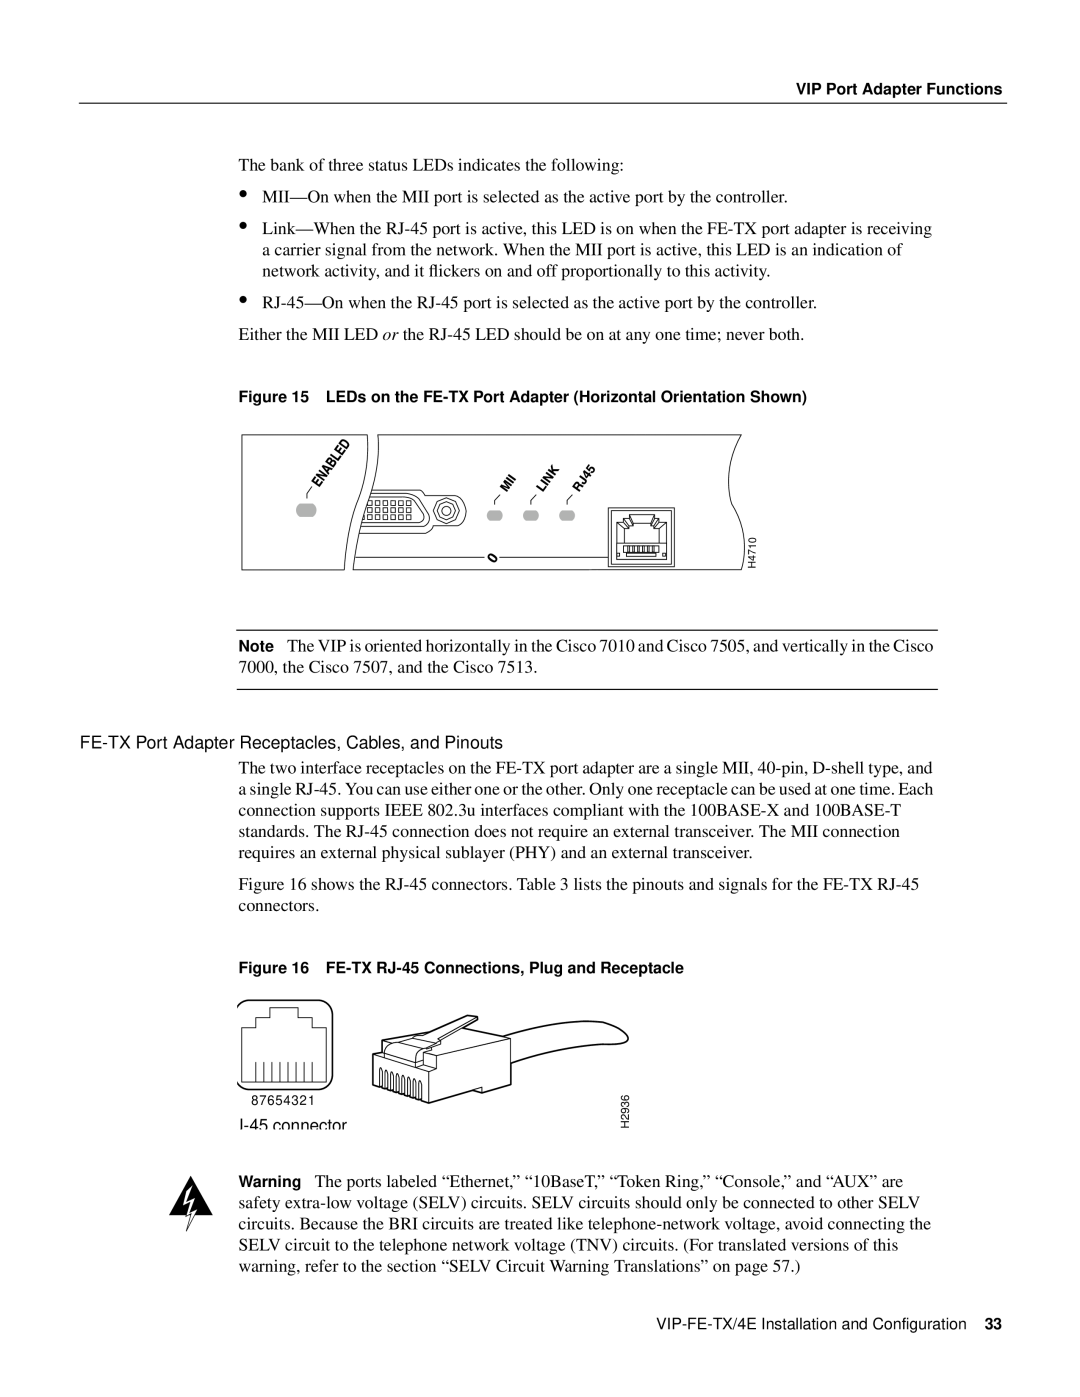 Cisco Systems VIP-FE-TX/4E manual The bank of three status LEDs indicates the following 